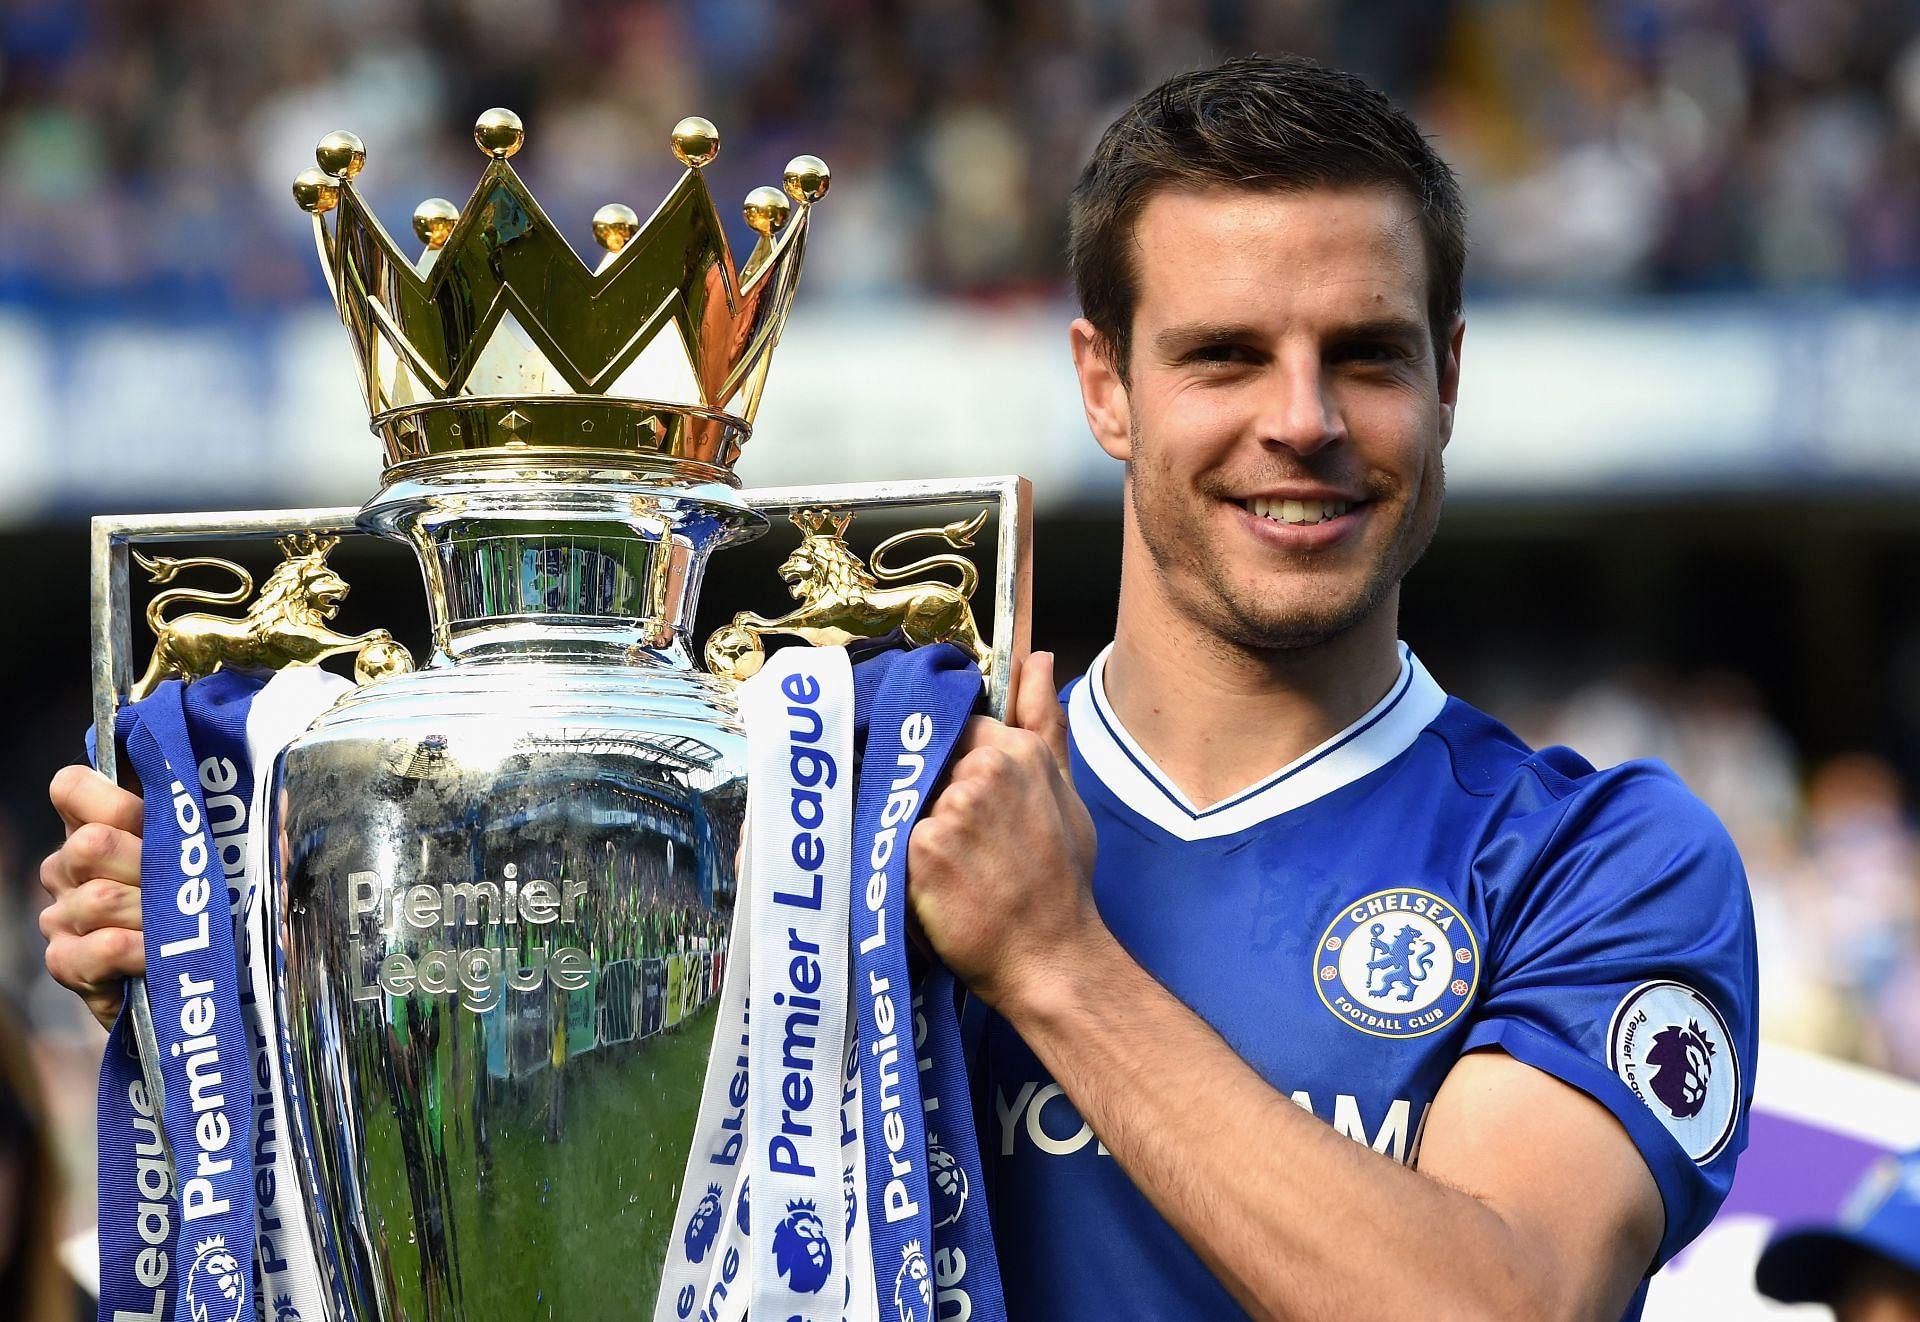 Ranking 5 most underrated Premier League players of 21st century